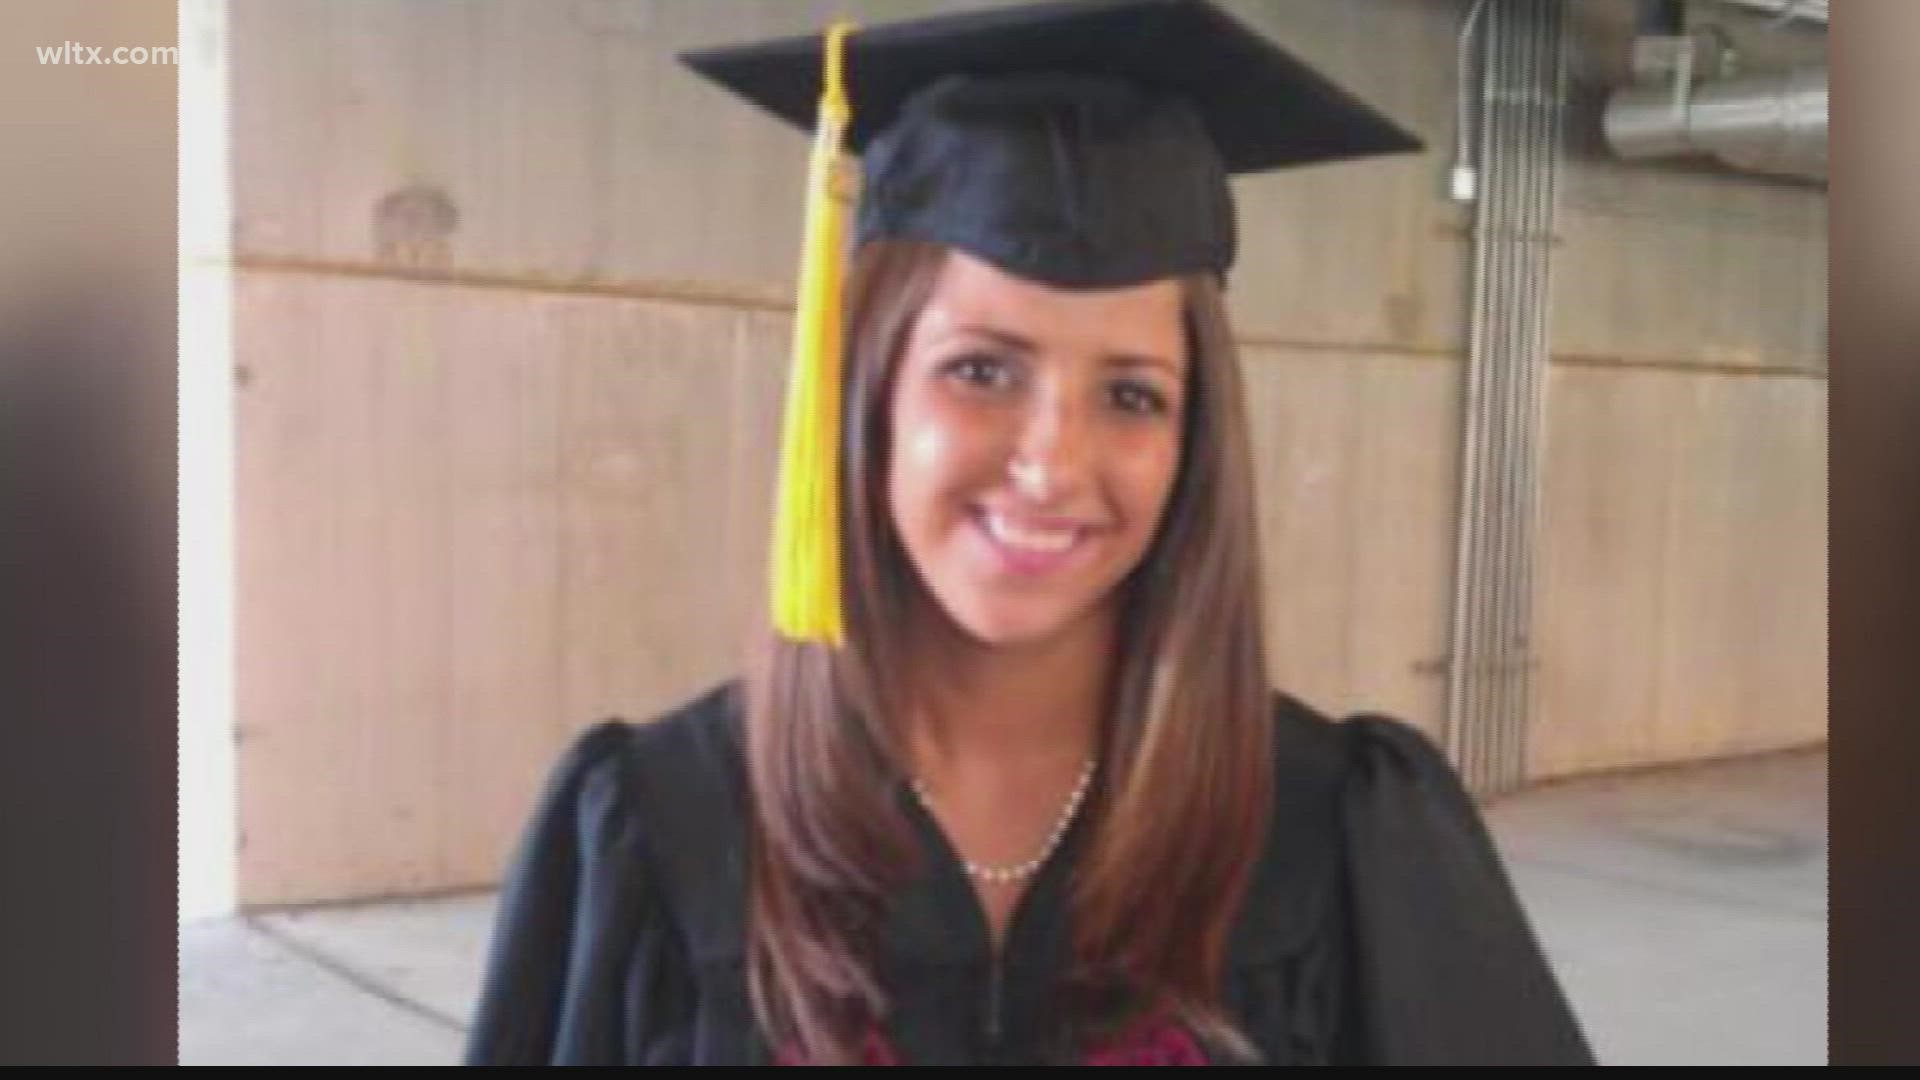 Lindsey Bires was a nurse working in Columbia in 2012 when she was hit by a car outside her job.